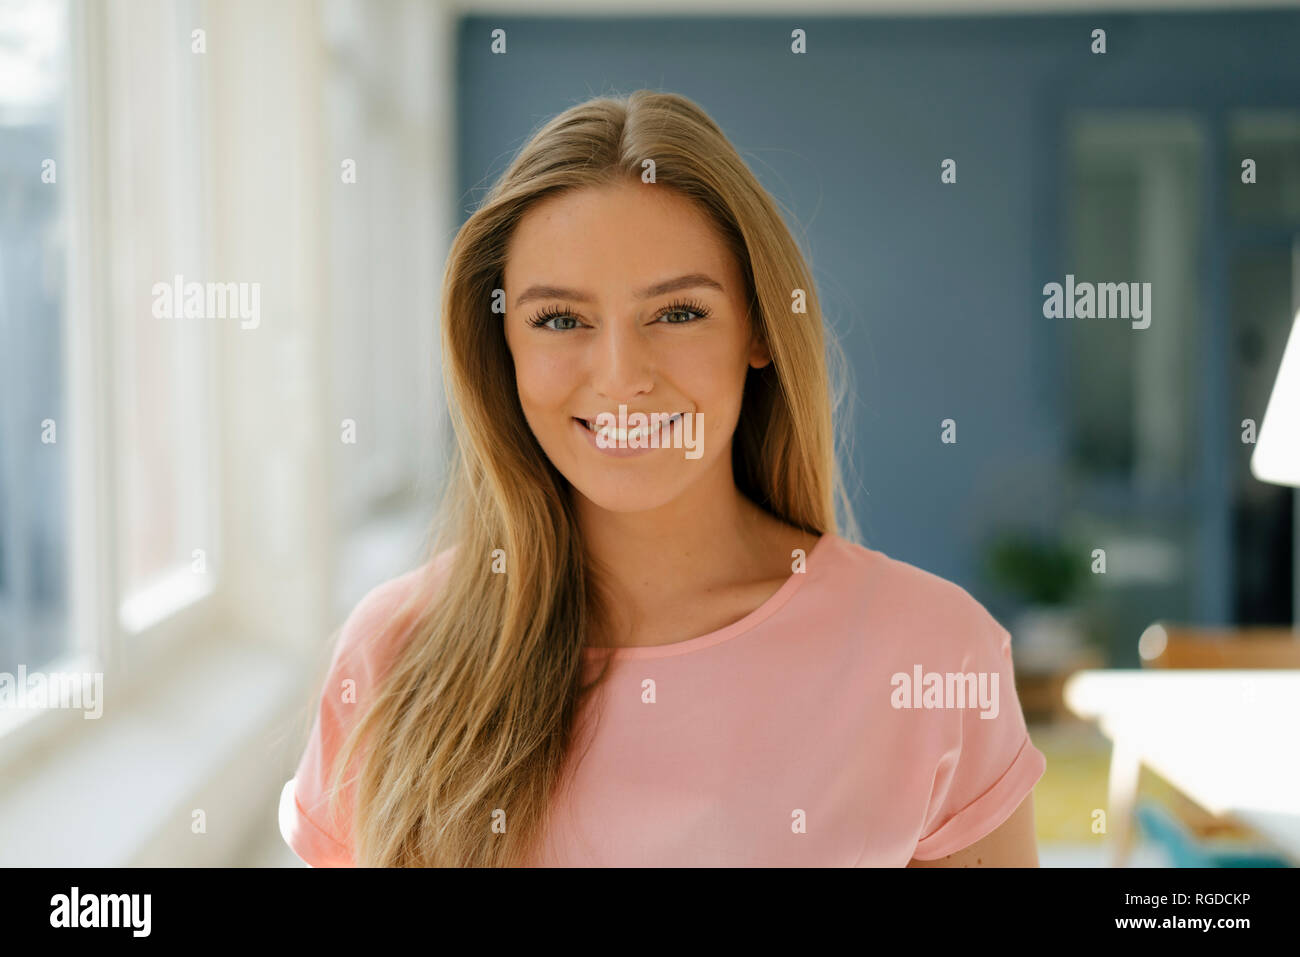 Portrait of smiling young woman at home Stock Photo